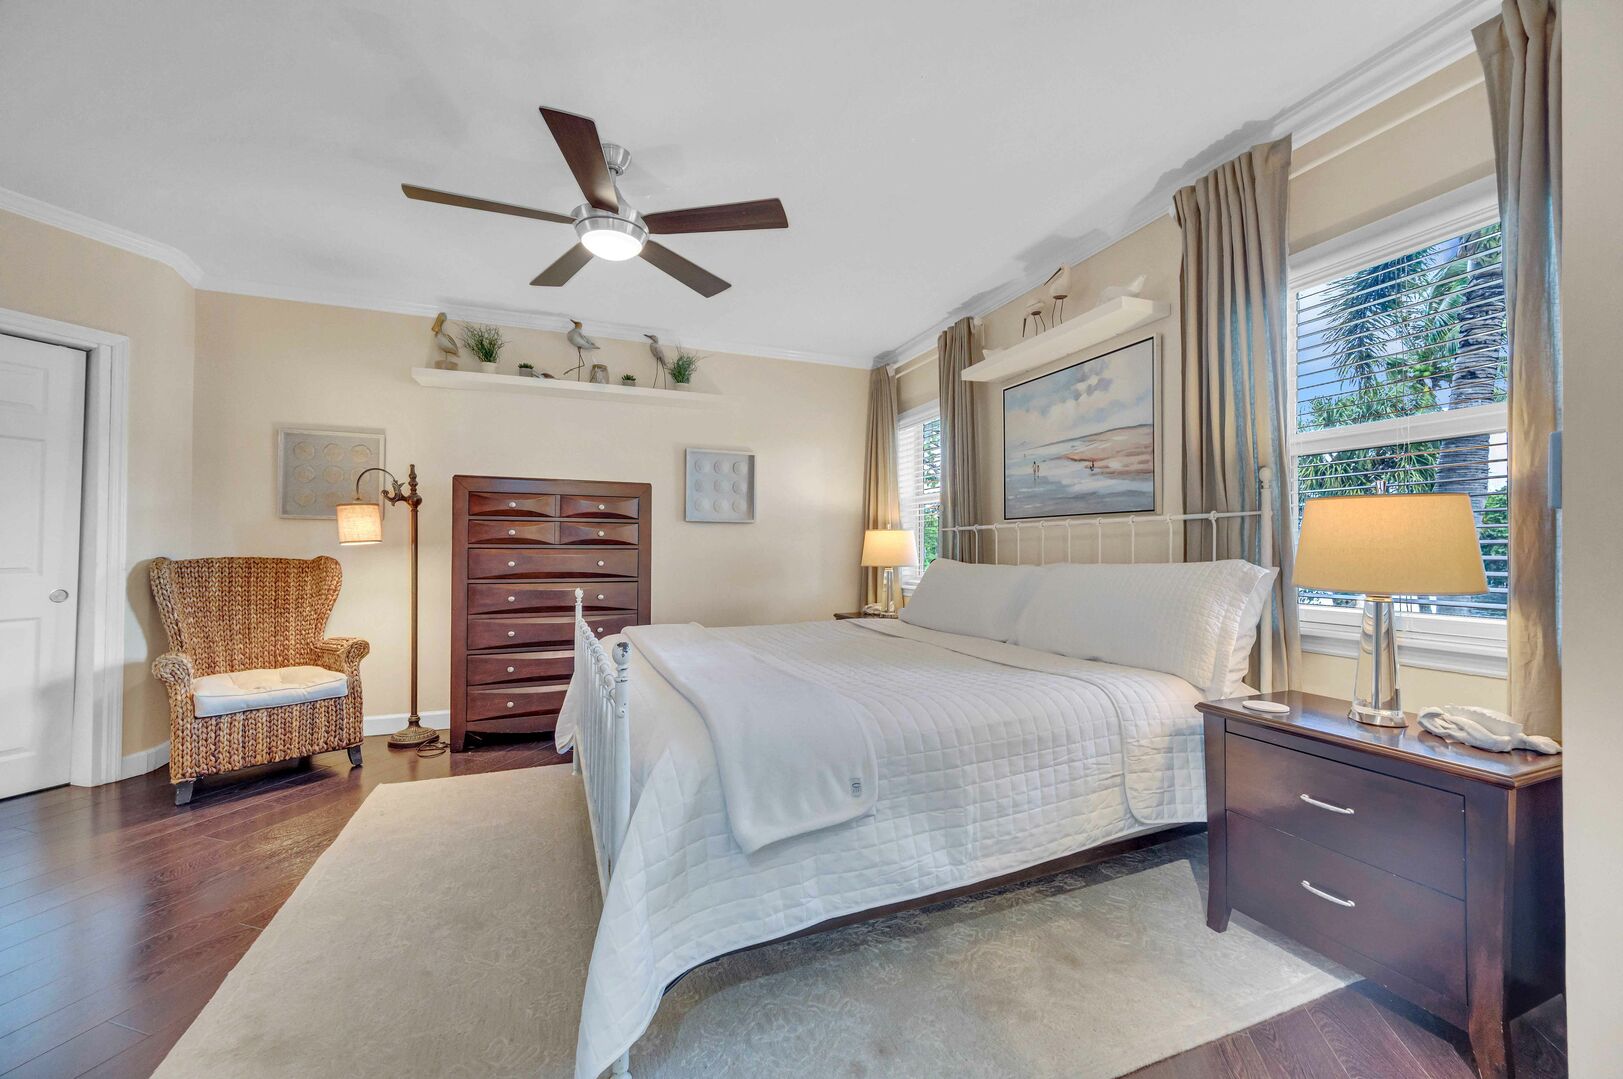 Spacious Priamary bedroom, featuring a king-sized bed and a Smart TV.